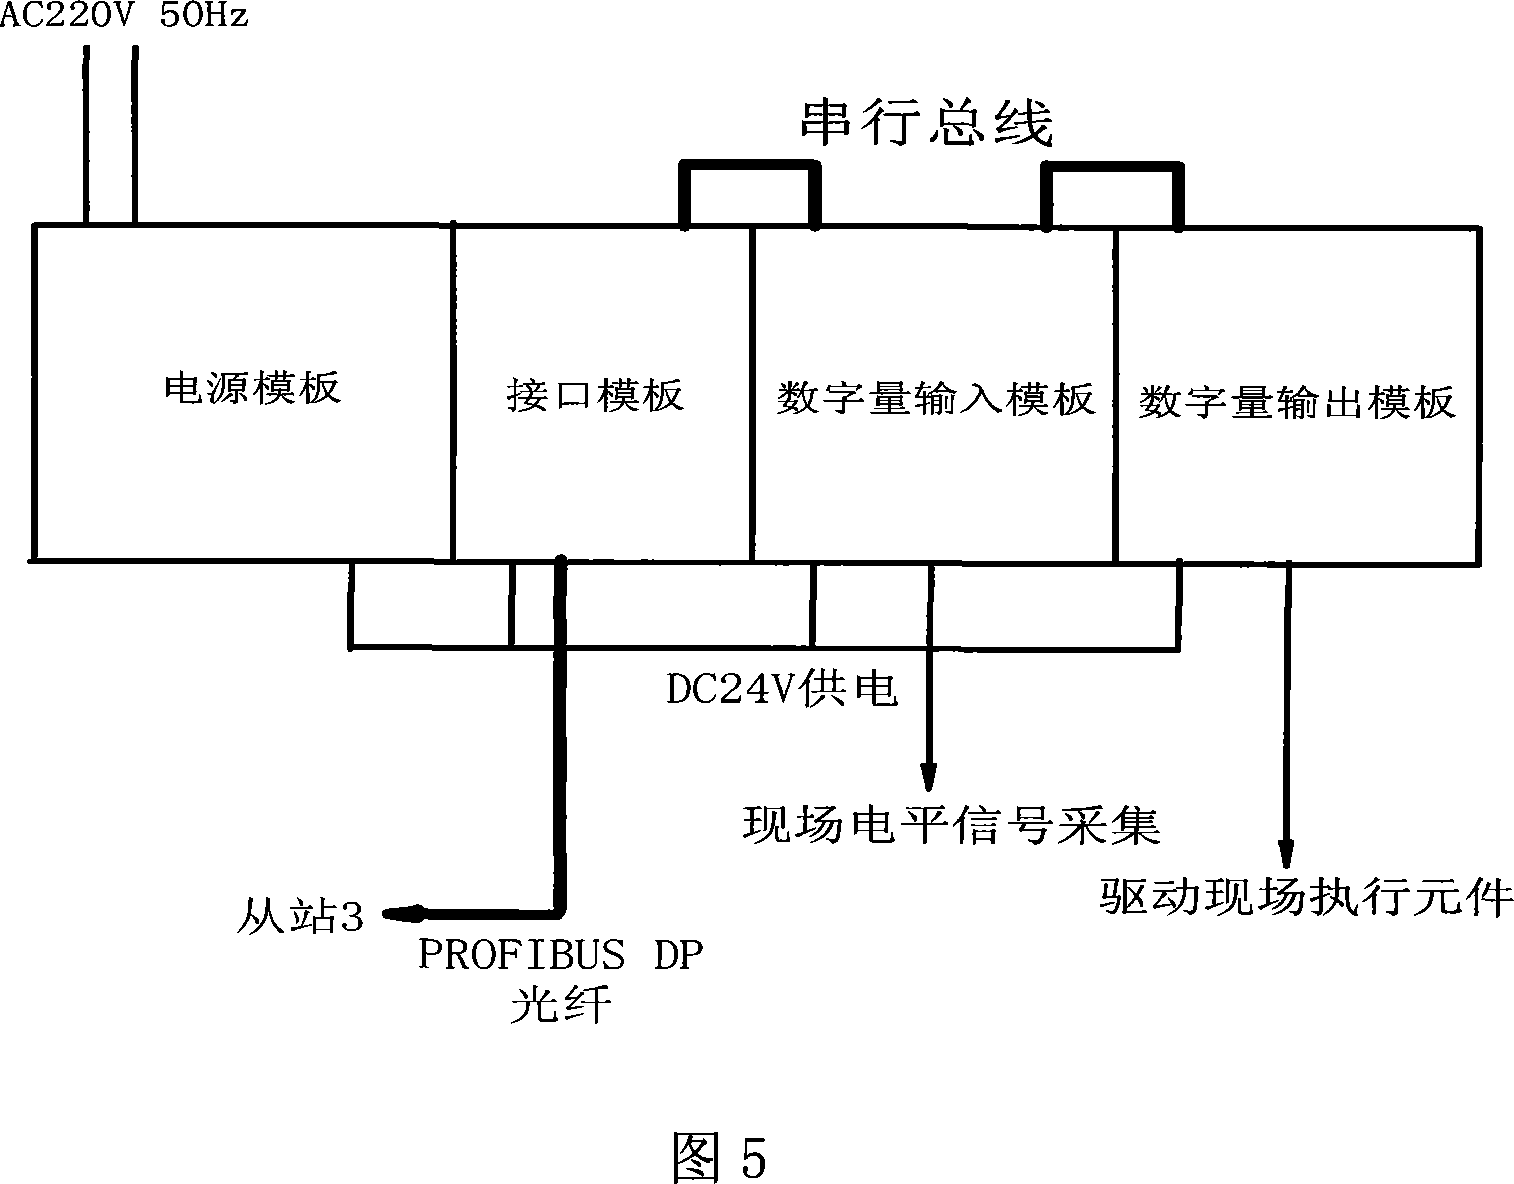 Electrical control workstation of macrotype isostatic pressing machine